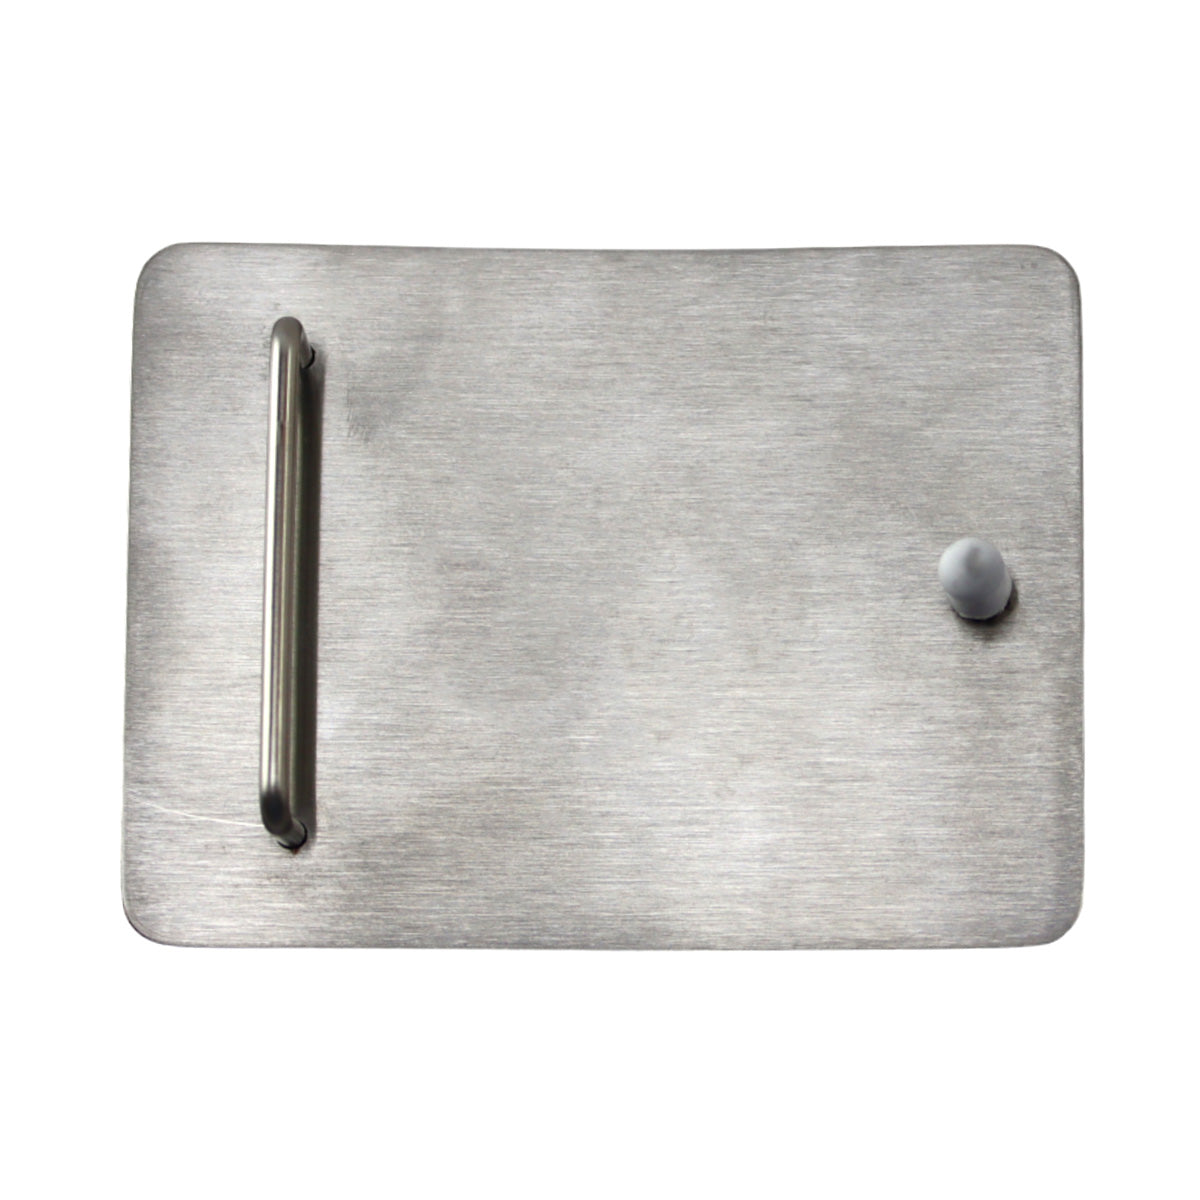 William Haskell - Stainless Steel and Baked Enamel Buffalo Belt Buckle